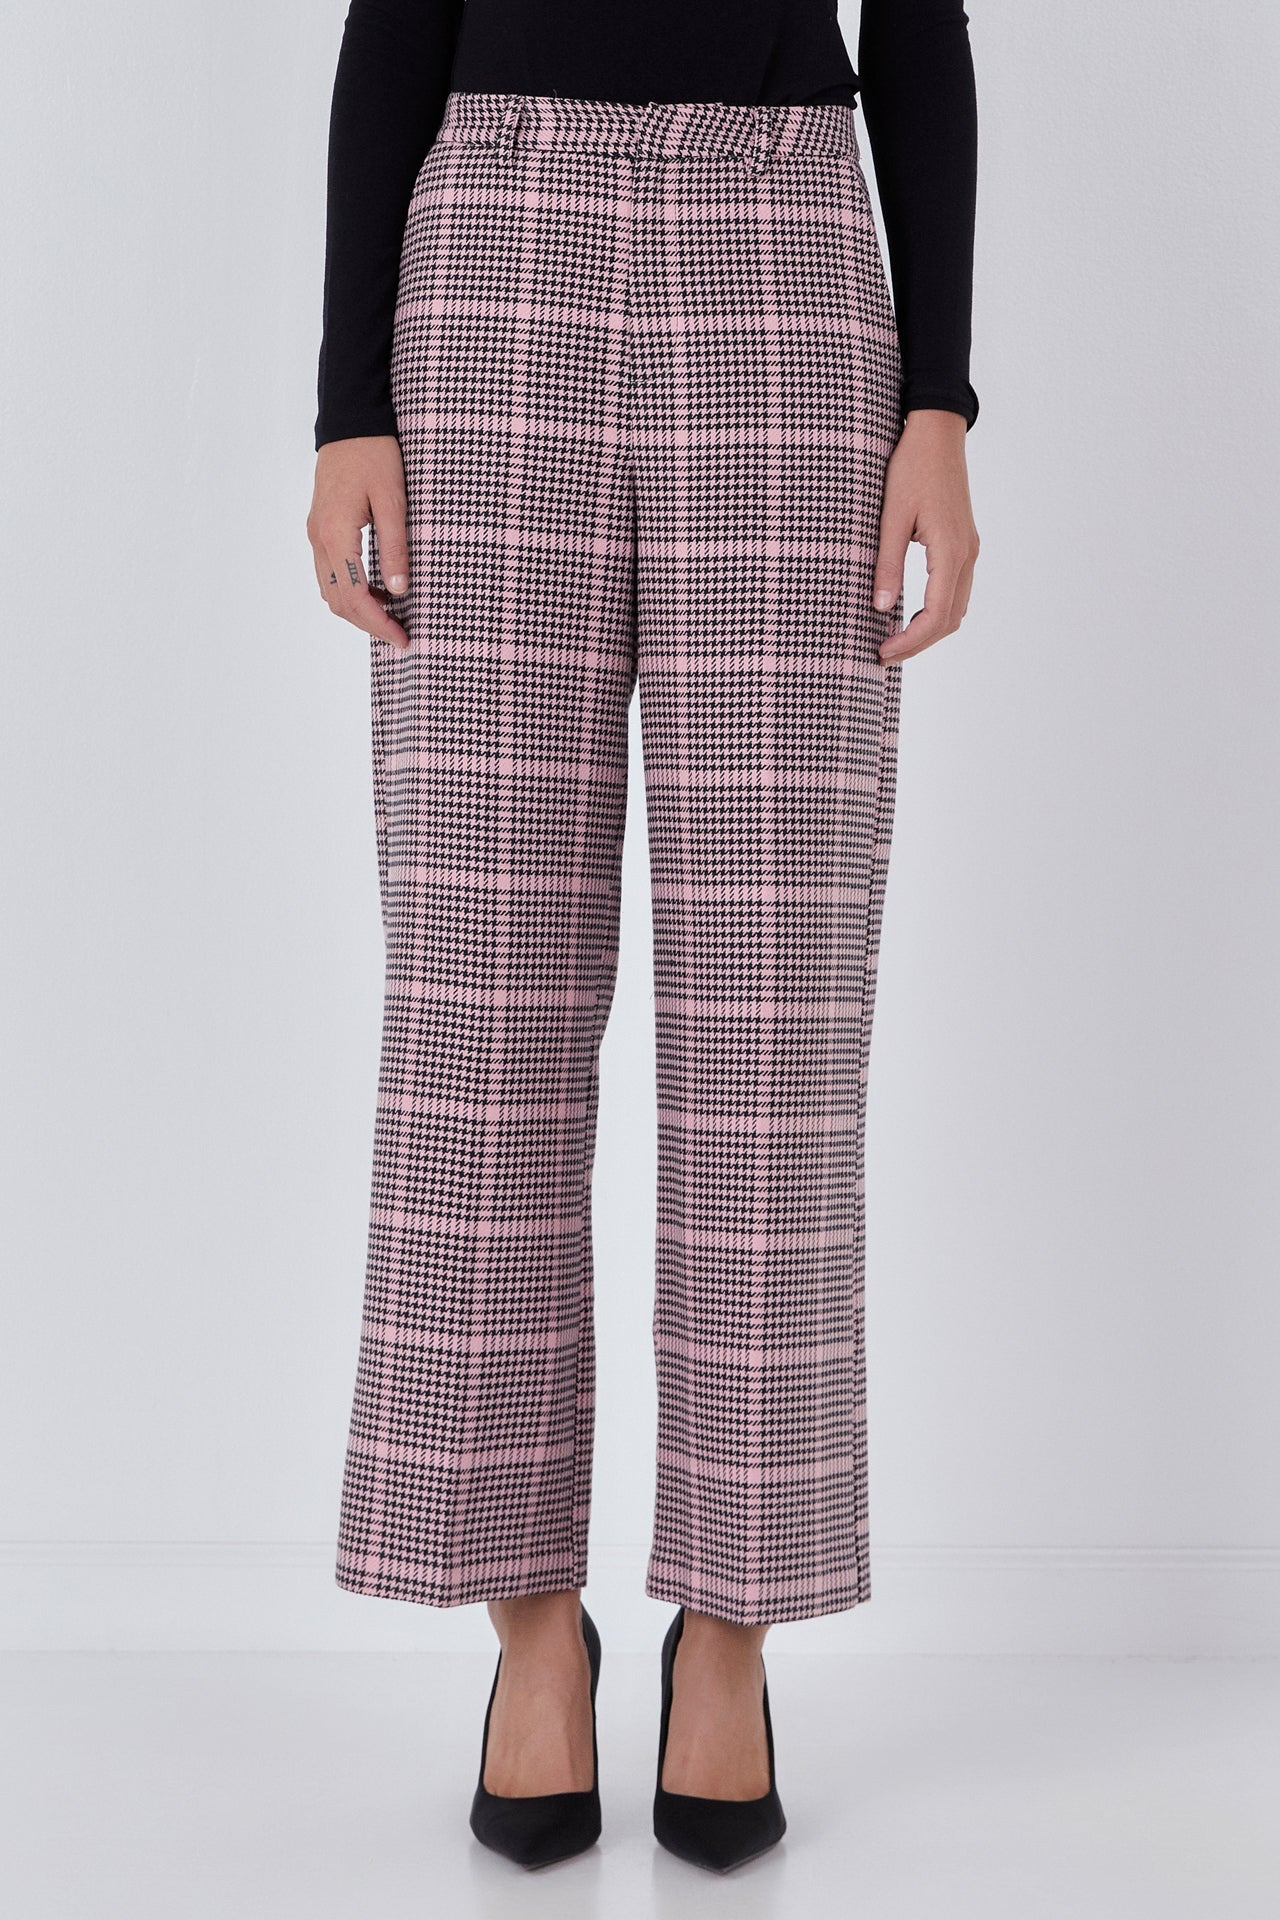 ENDLESS ROSE-Houndstooth Women Pants-PANTS available at Objectrare